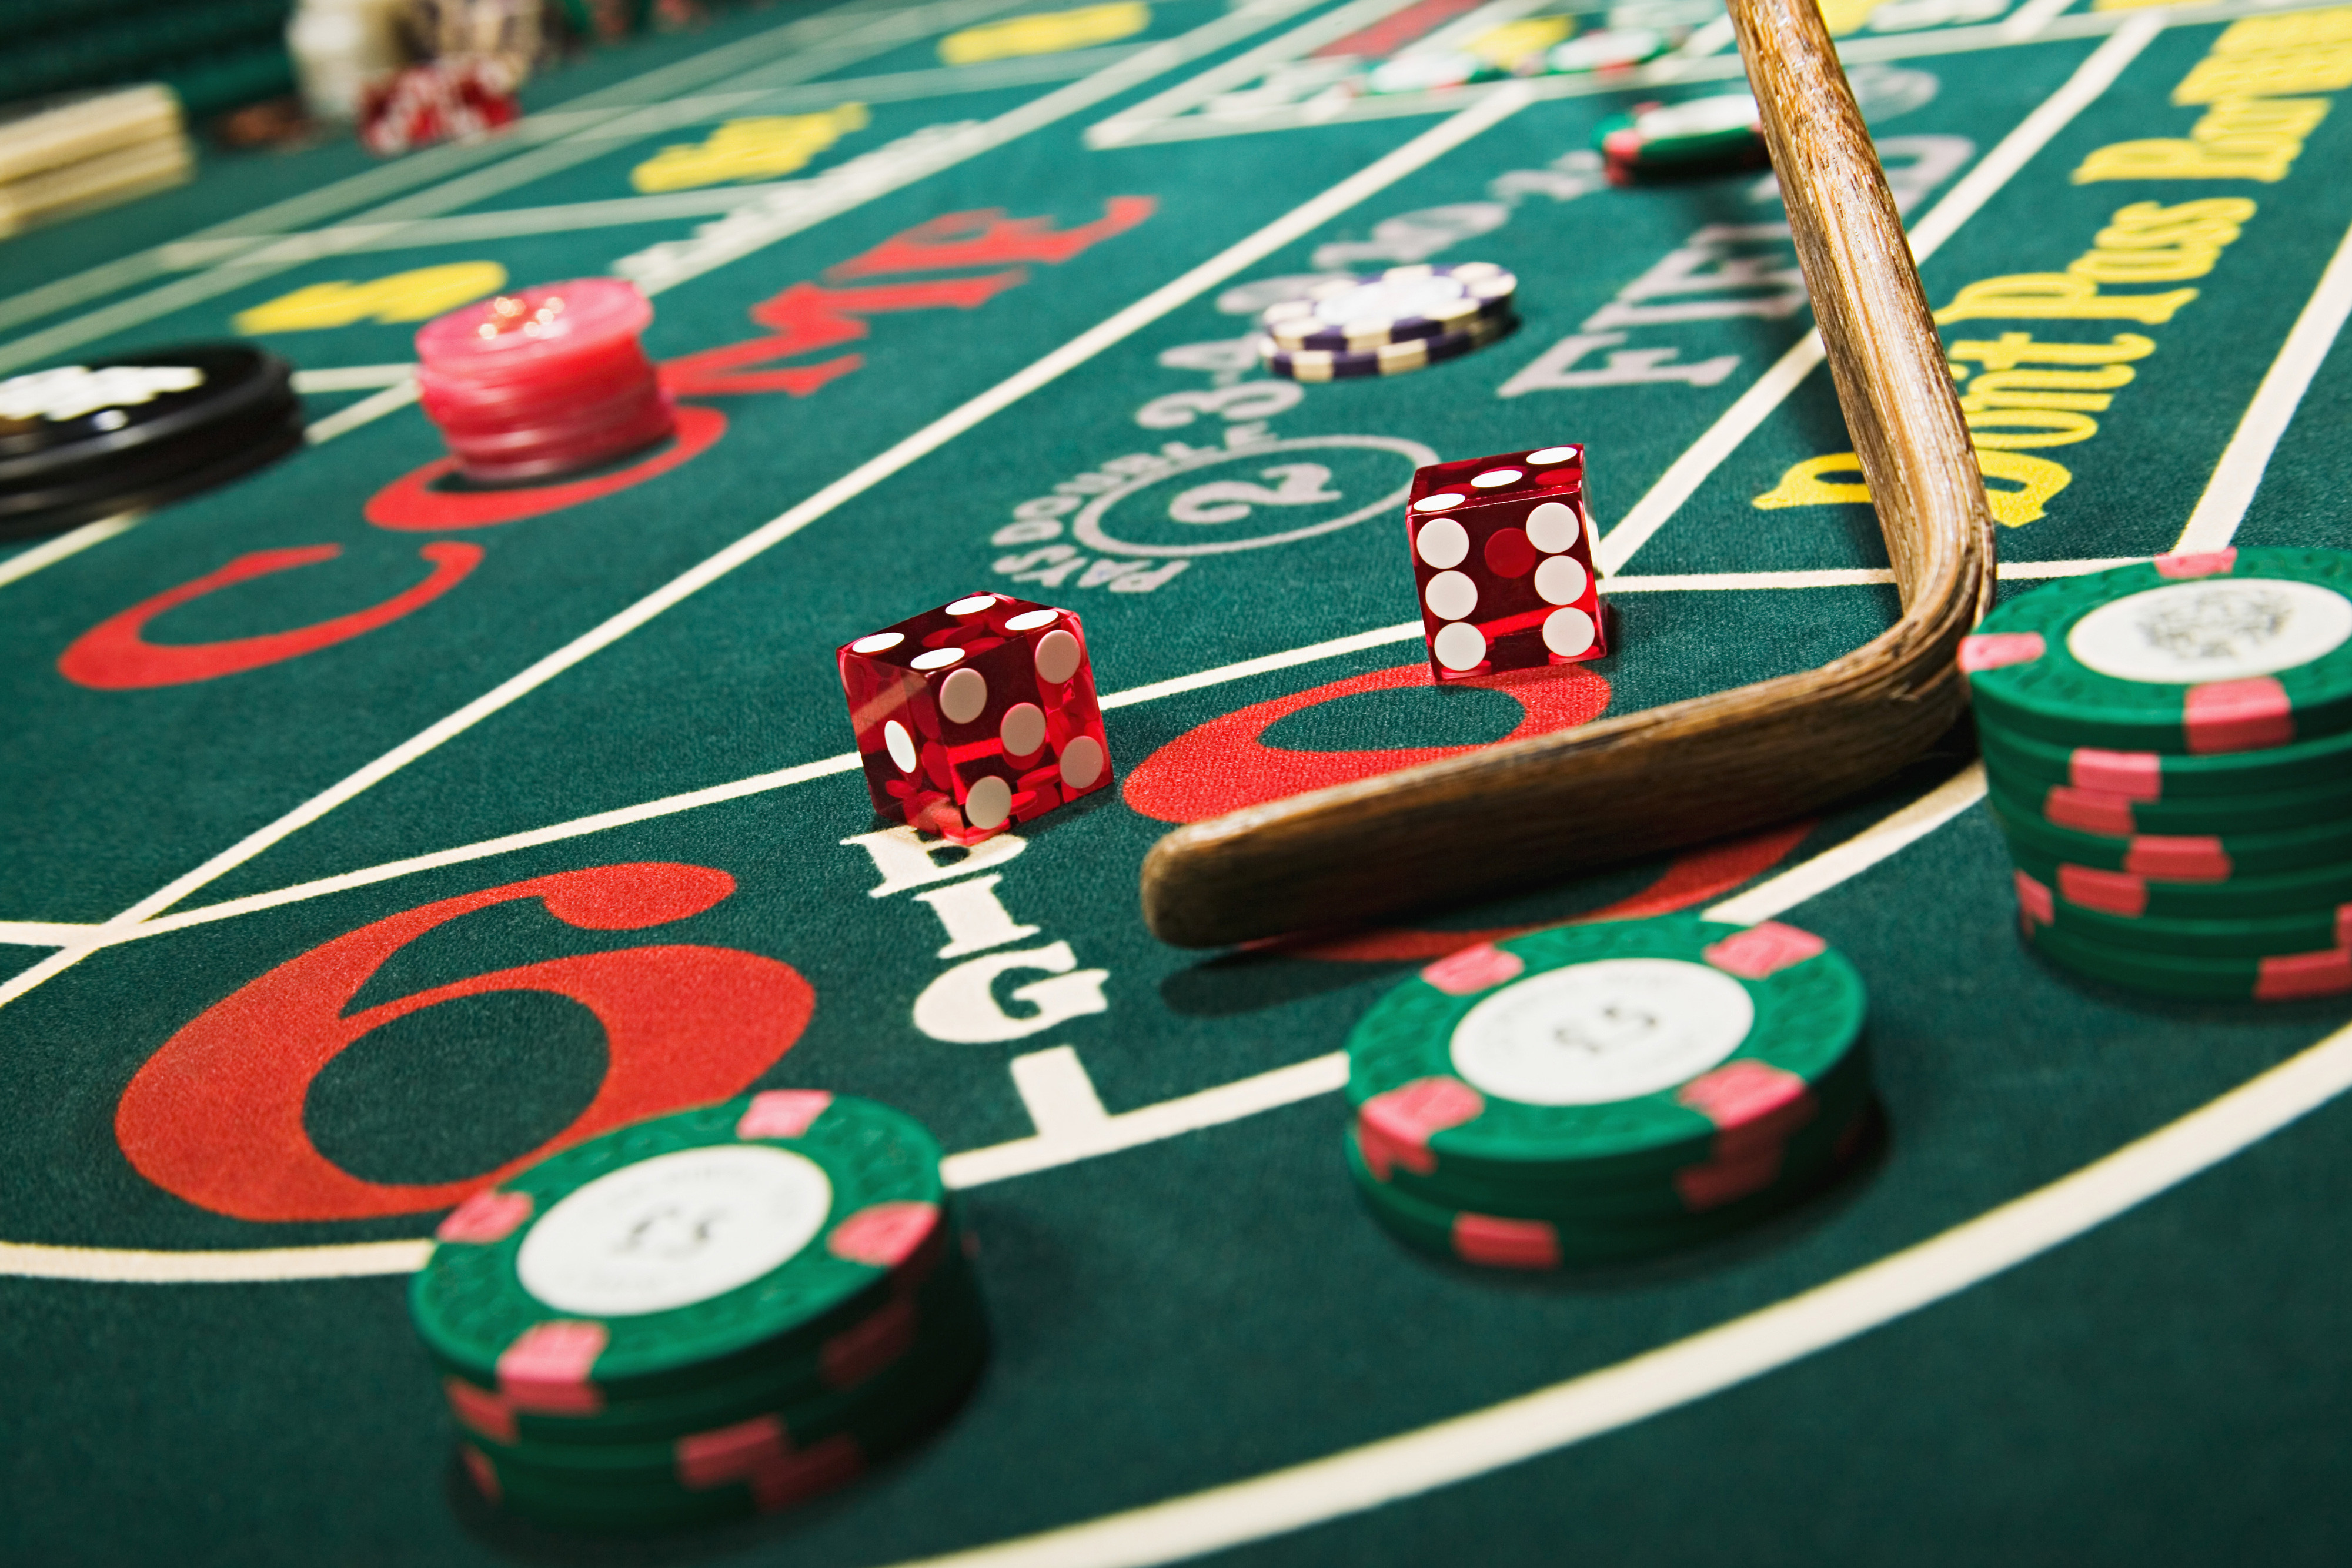 
Online Casino - Play With $10 Free on Us